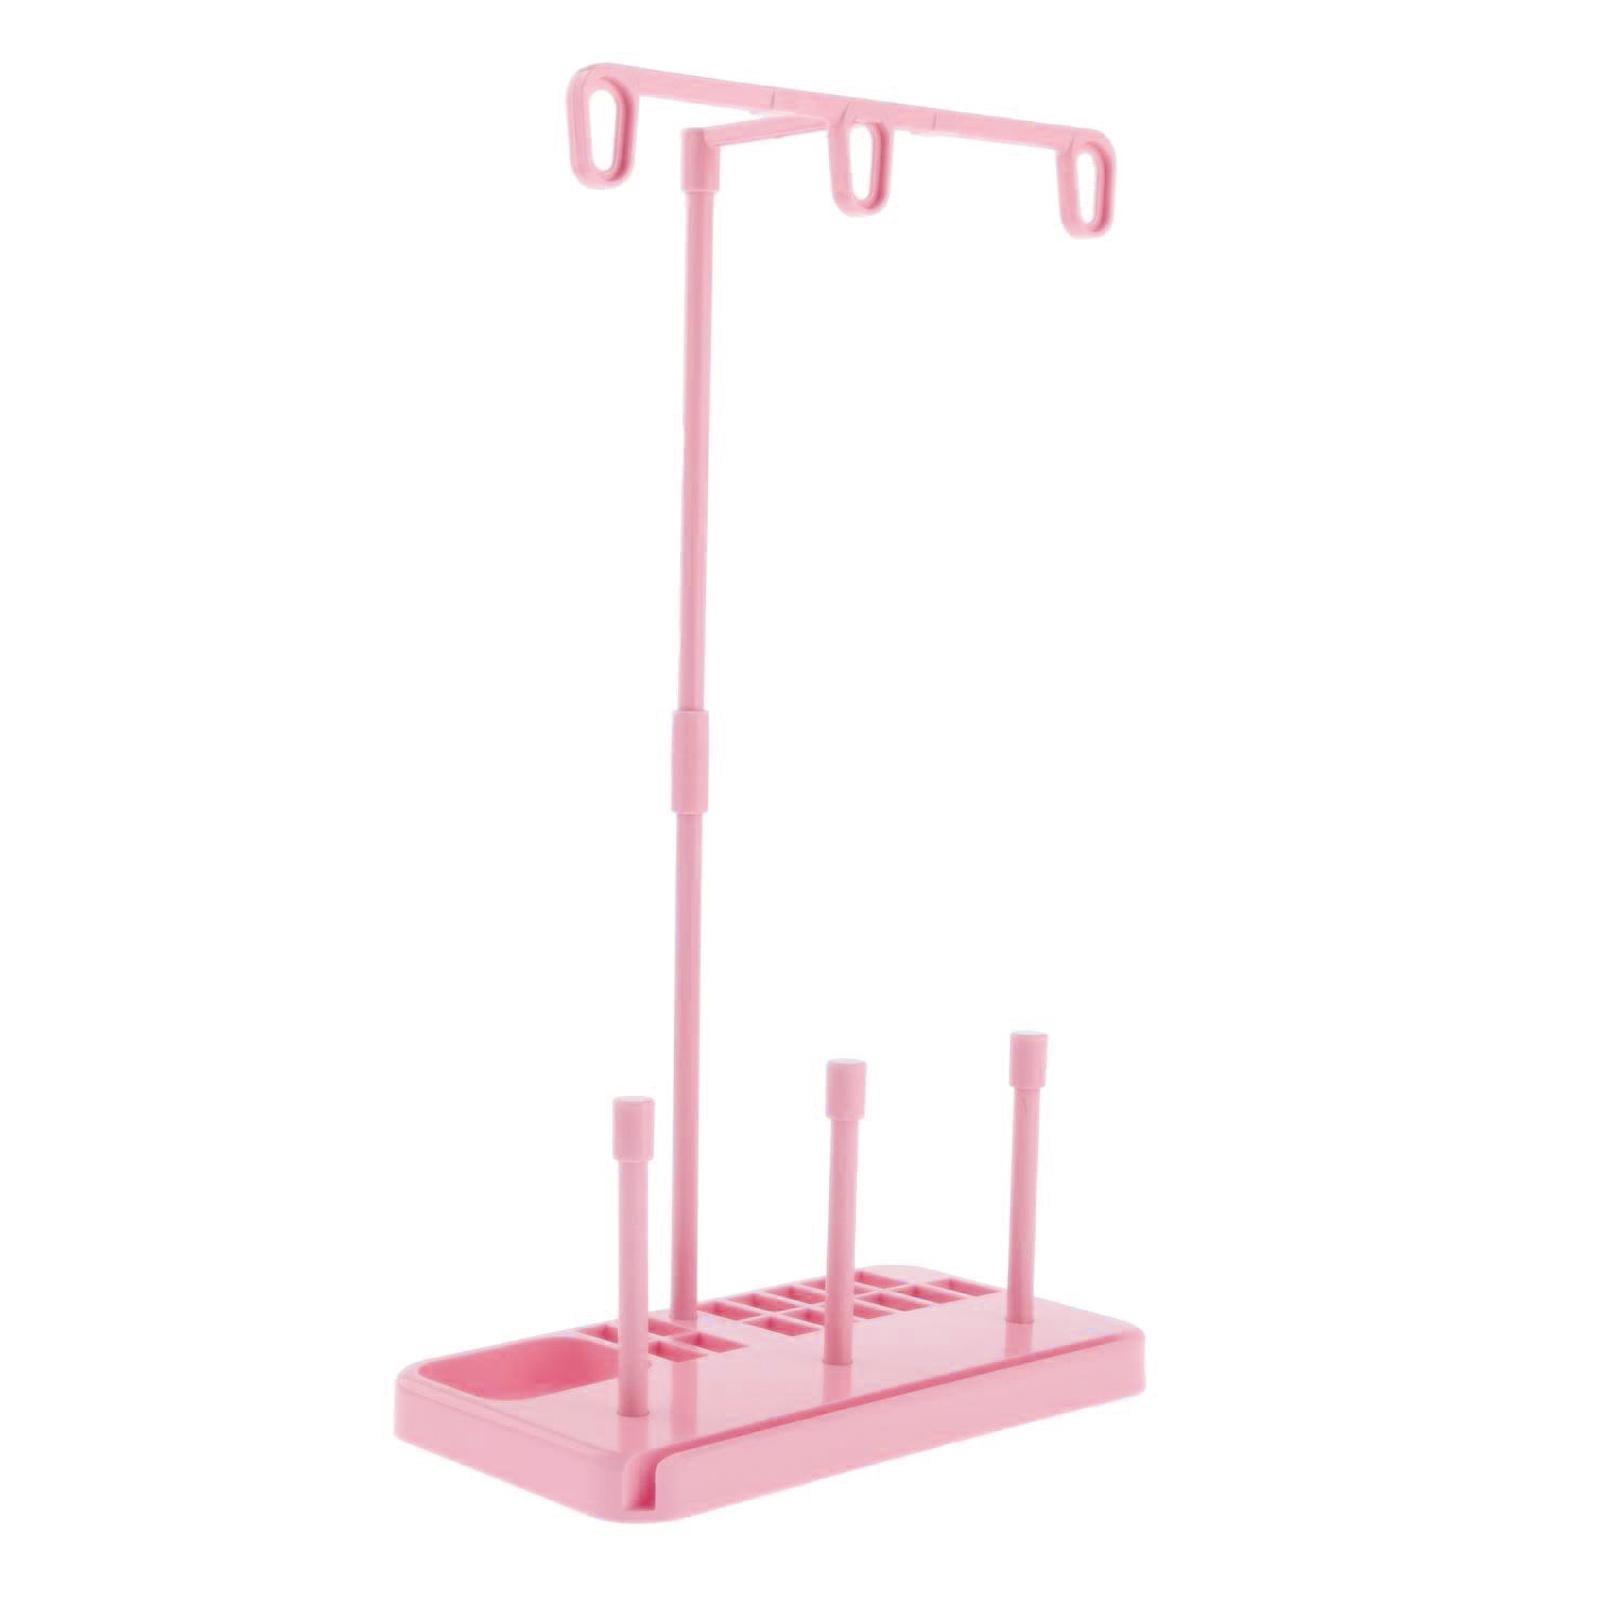 ThreadNanny Single Cone Spool Stand Alone Cast Iron Thread Stand Thread Holder Fits for Sewing Embroidery Serger Brand